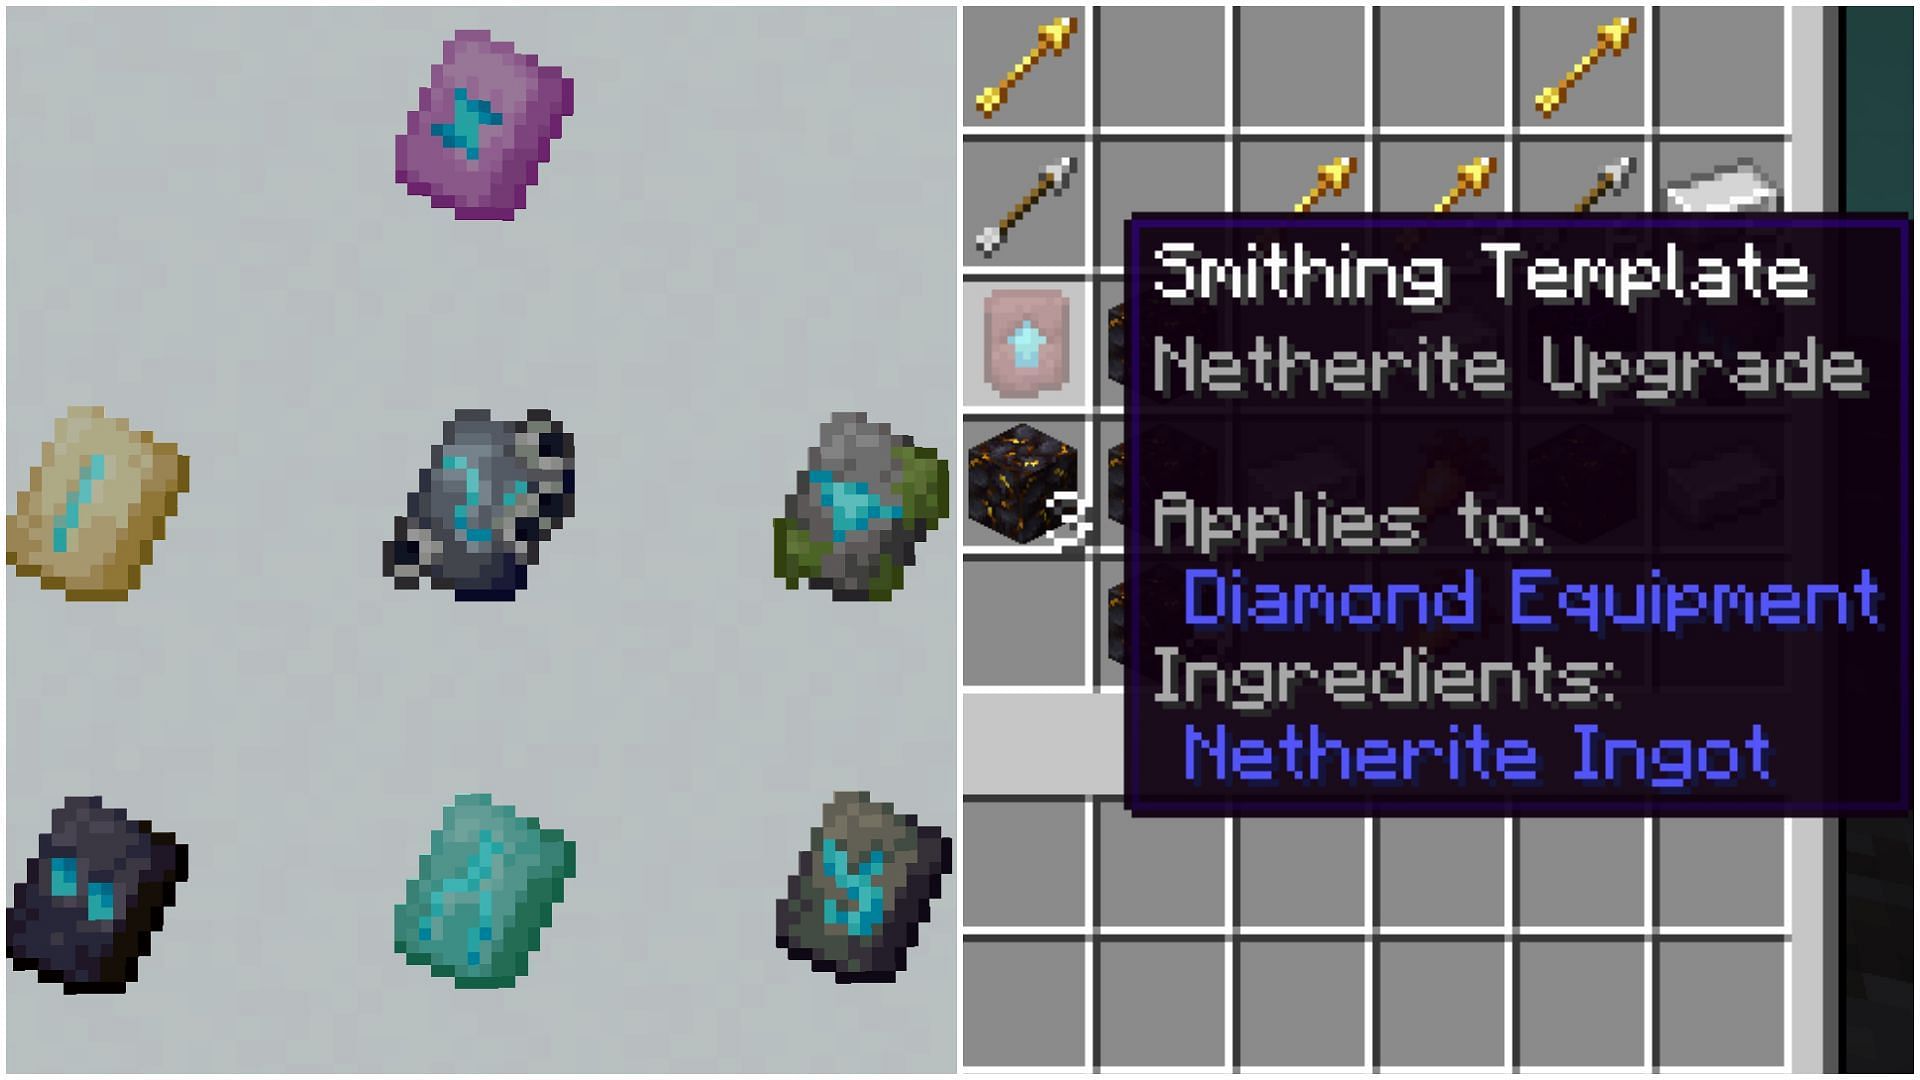 Minecraft smithing template guide How to find, uses, and more